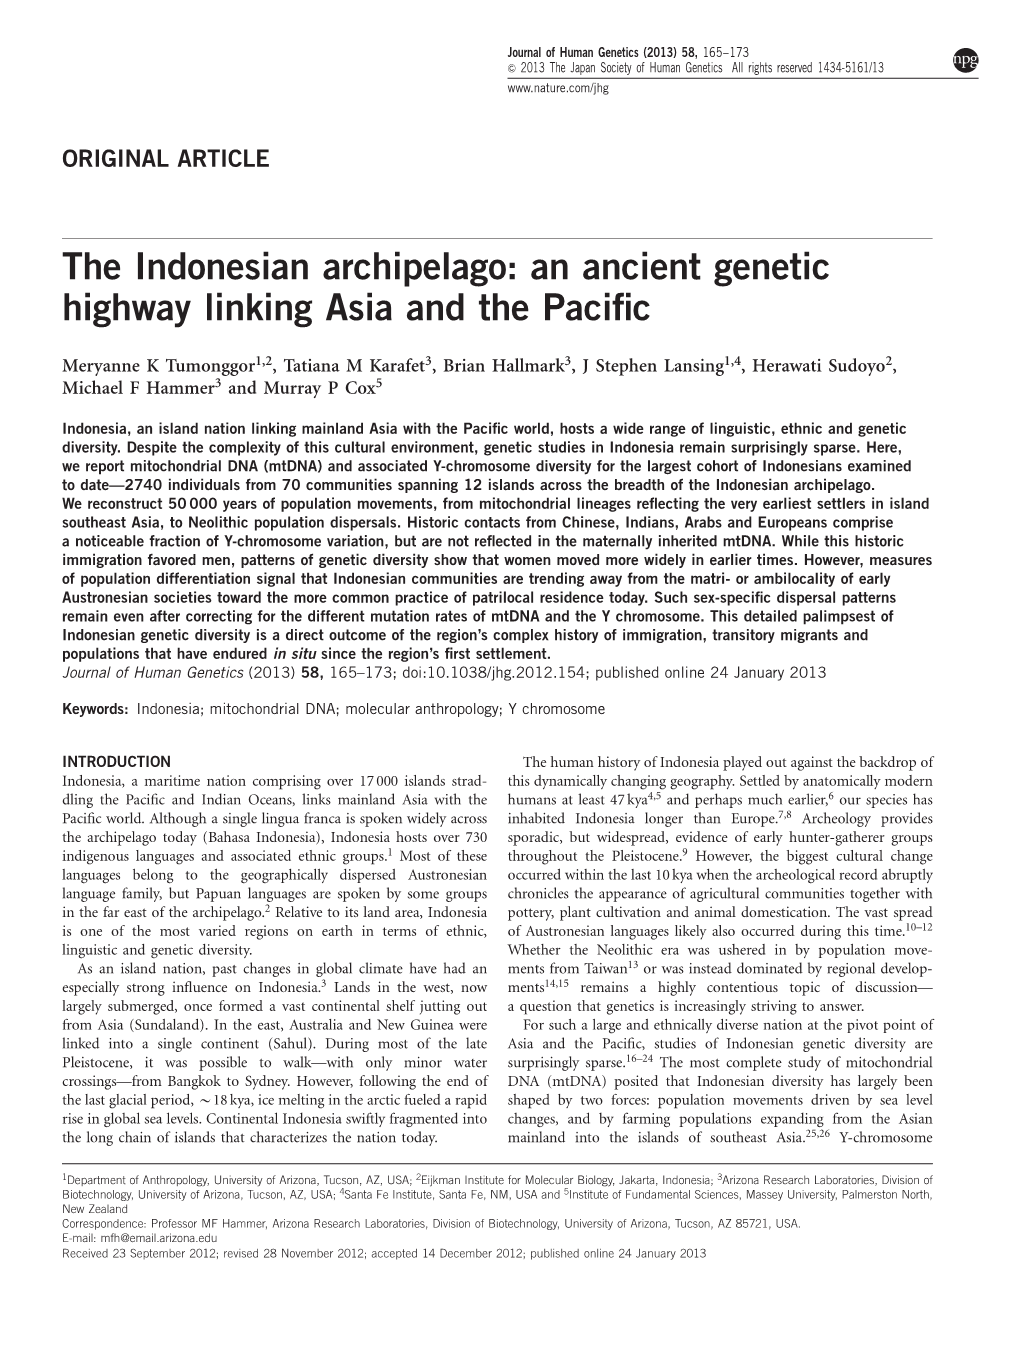 The Indonesian Archipelago: an Ancient Genetic Highway Linking Asia and the Paciﬁc